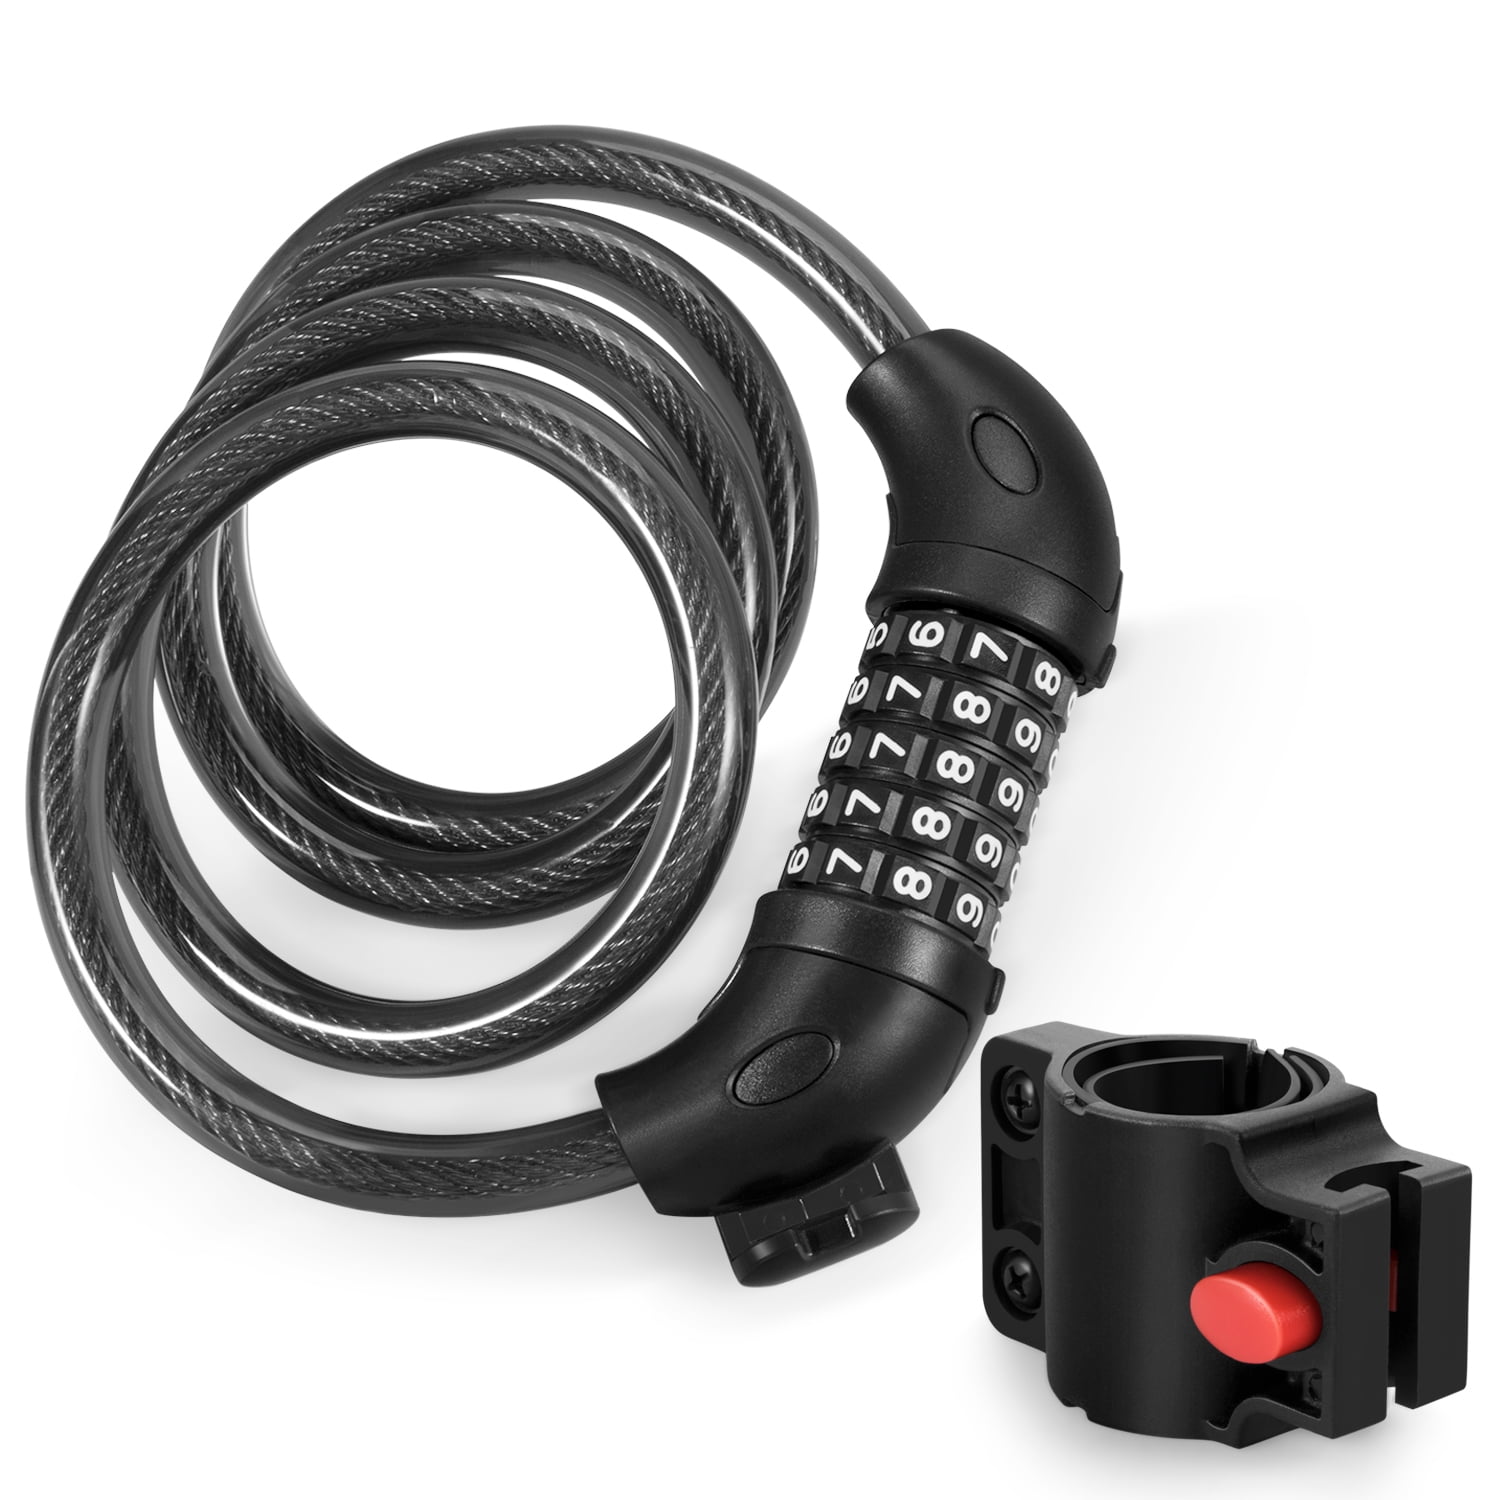 4 Digit Number Code Combination Bicycle Stroller Security Bike Lock Steel Cable 